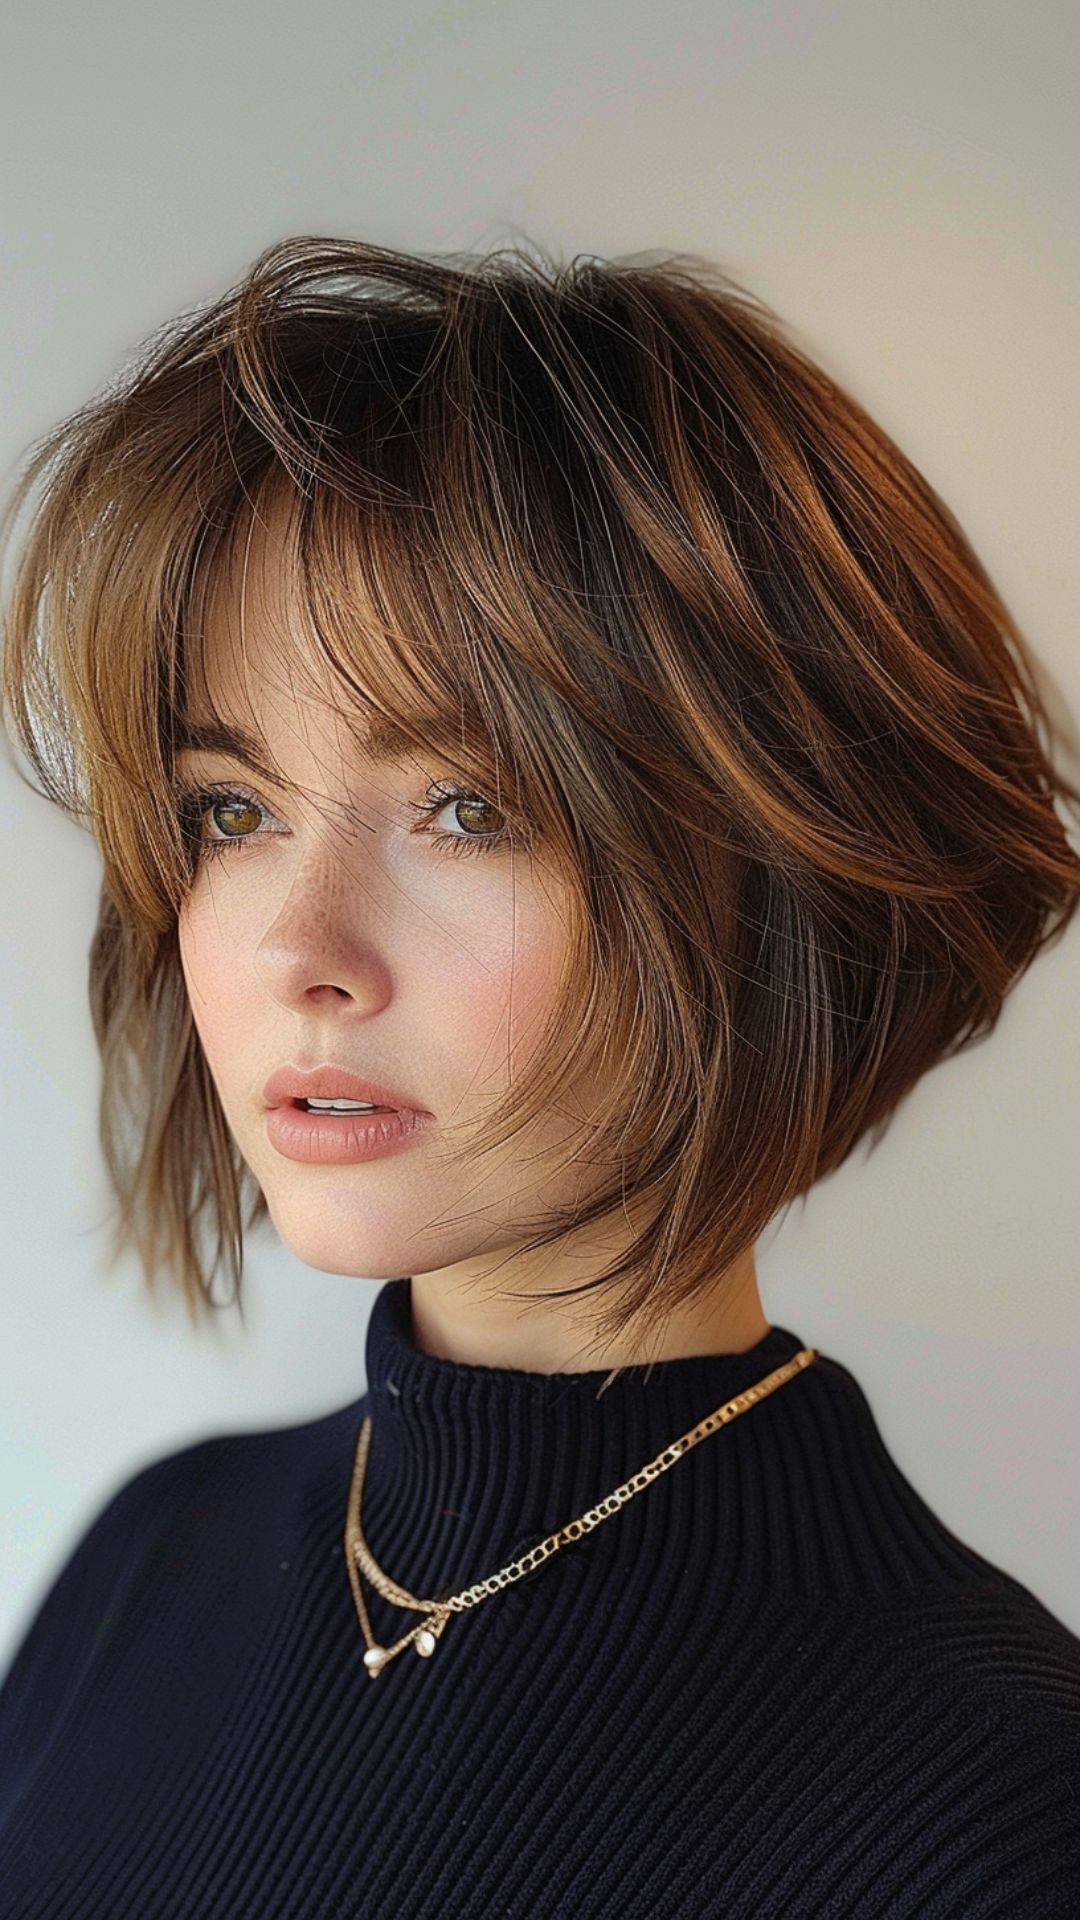 Get a Fresh Look with Short Layered Hairstyles